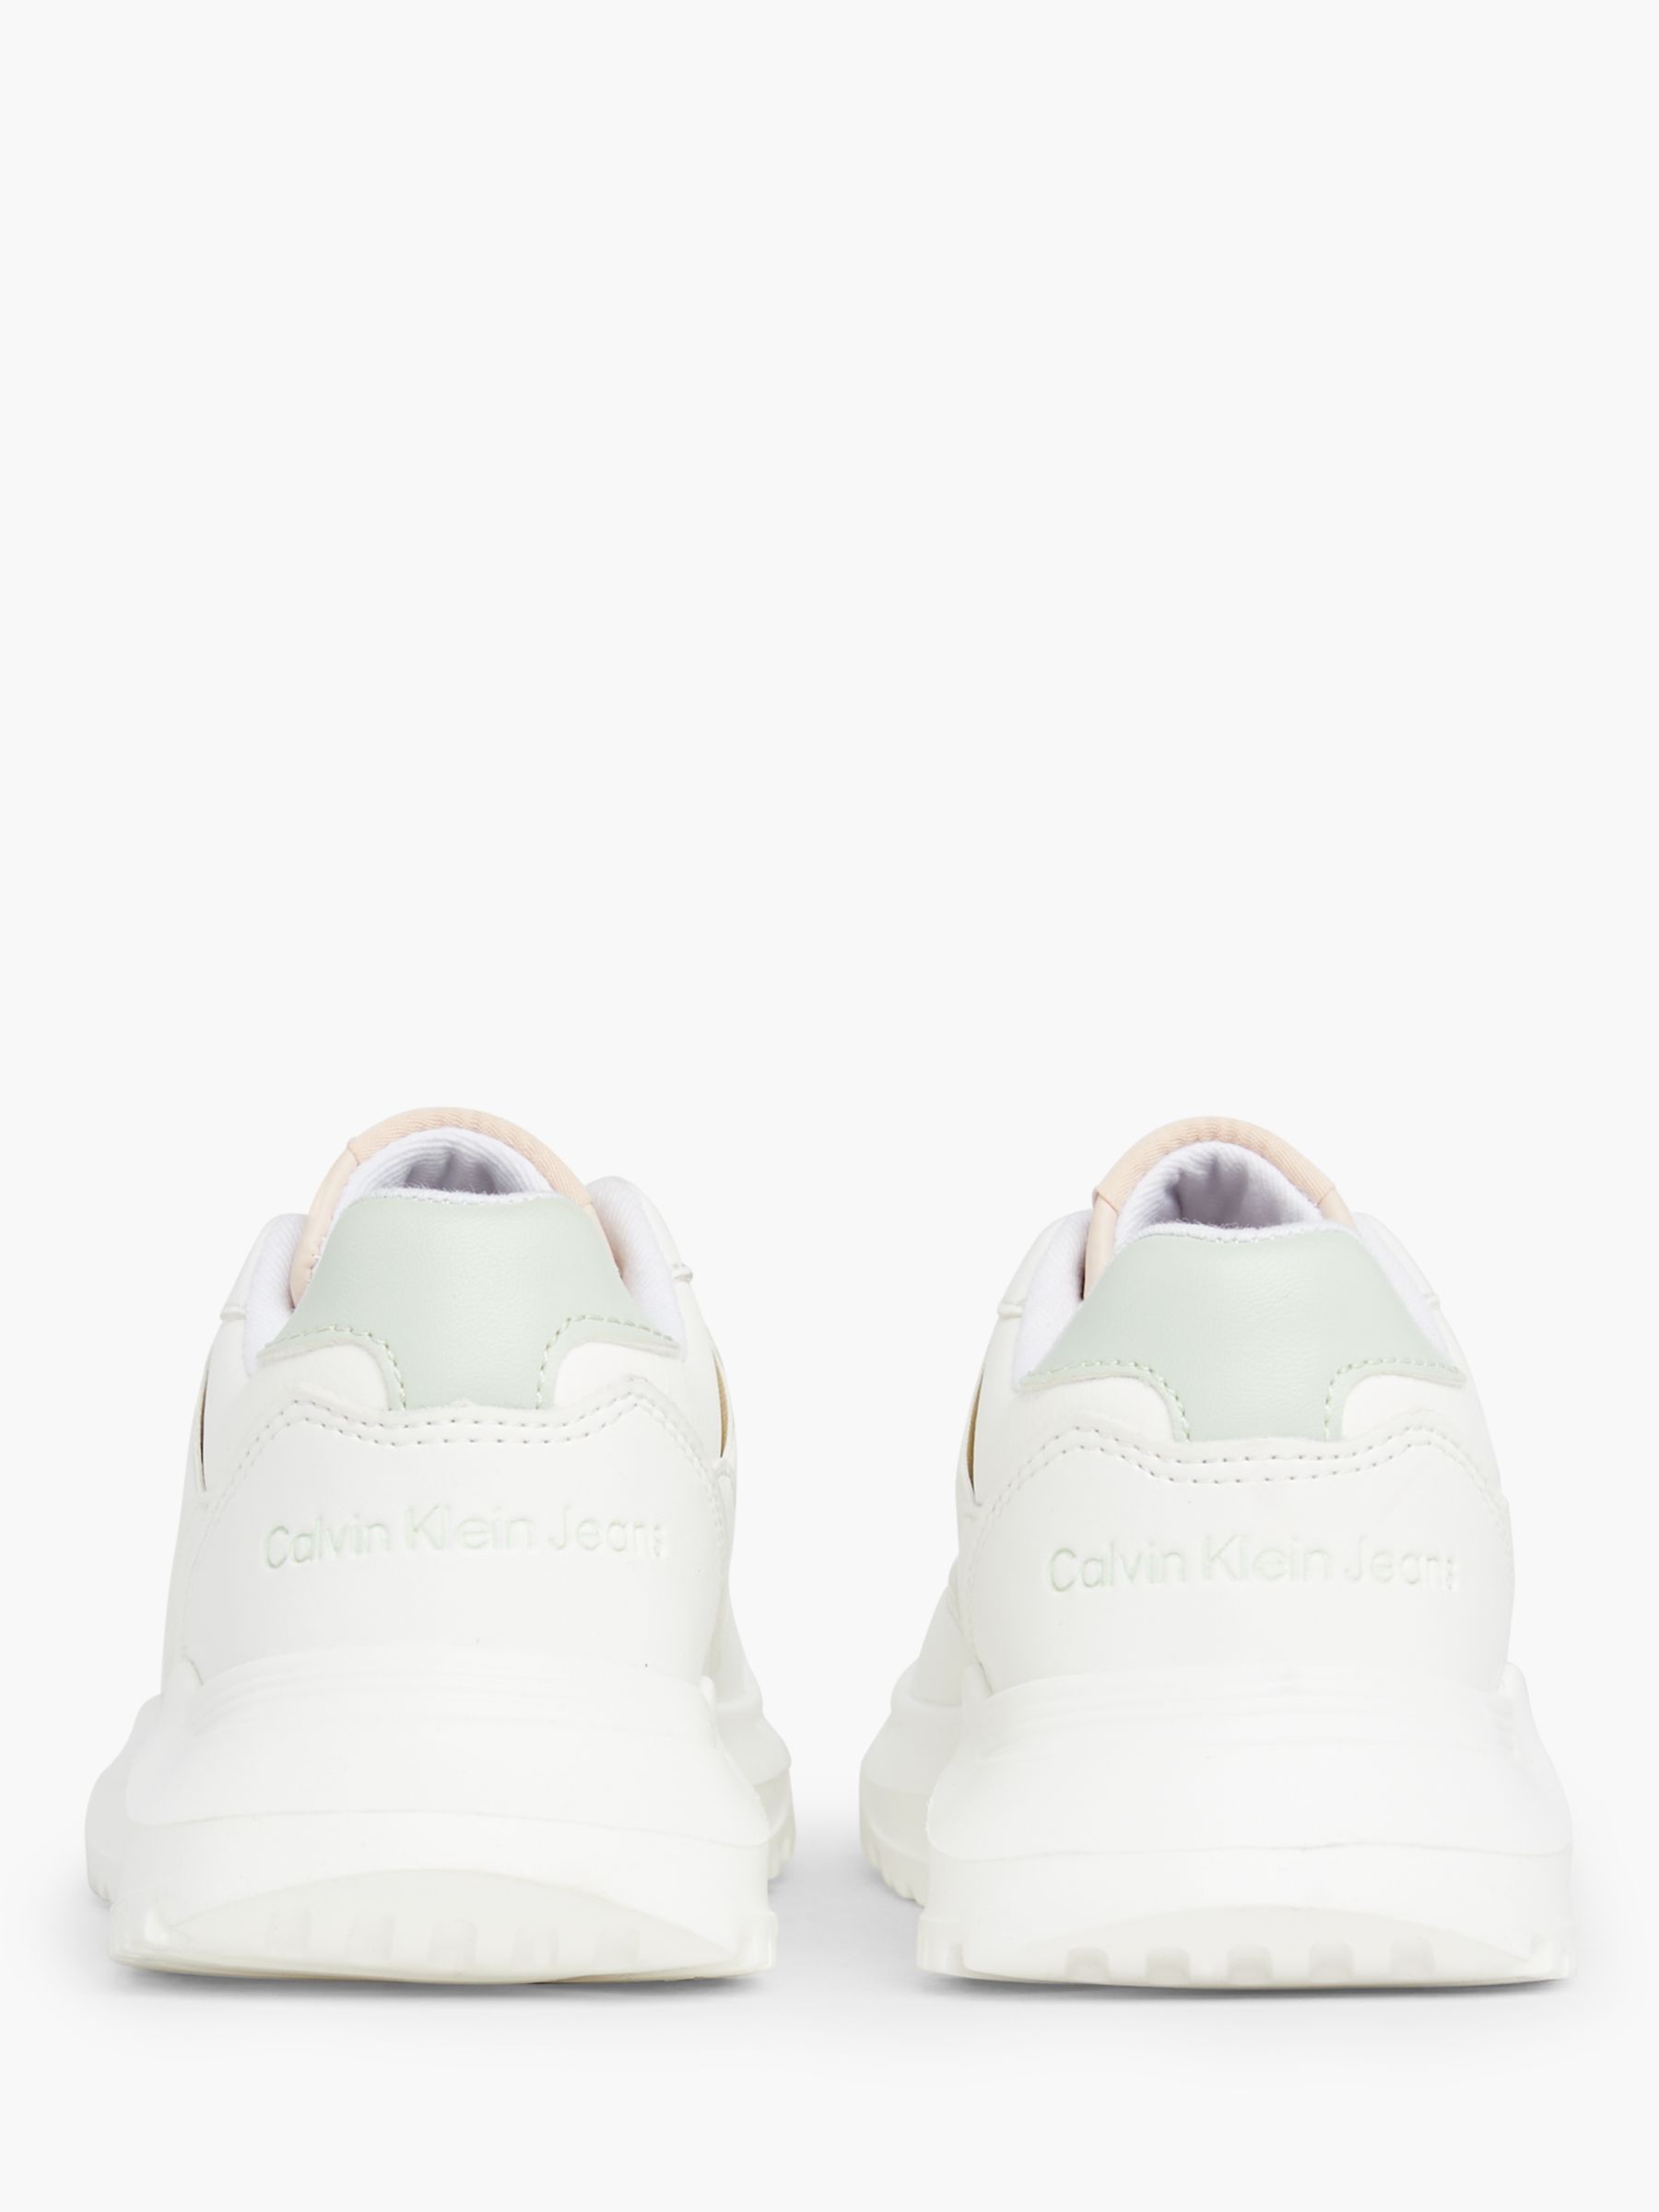 Calvin Klein Kids' CKJ Low Lace-Up Trainers, Off White/Green at John ...